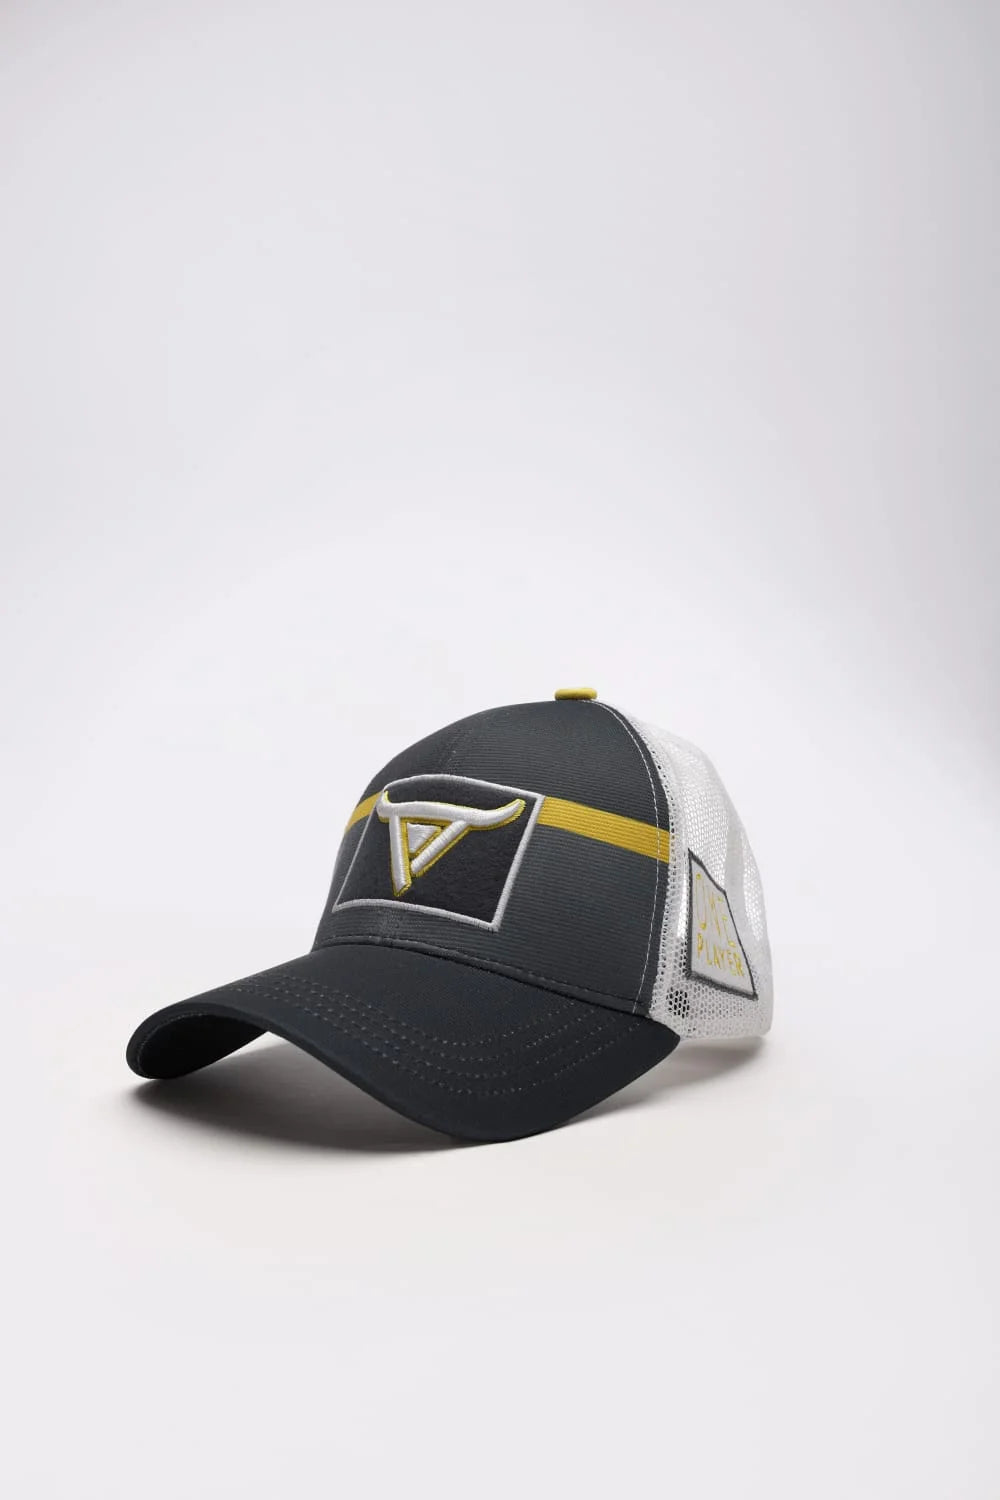 Unisex  Grey & White Trucker cap, has a visor by One Player